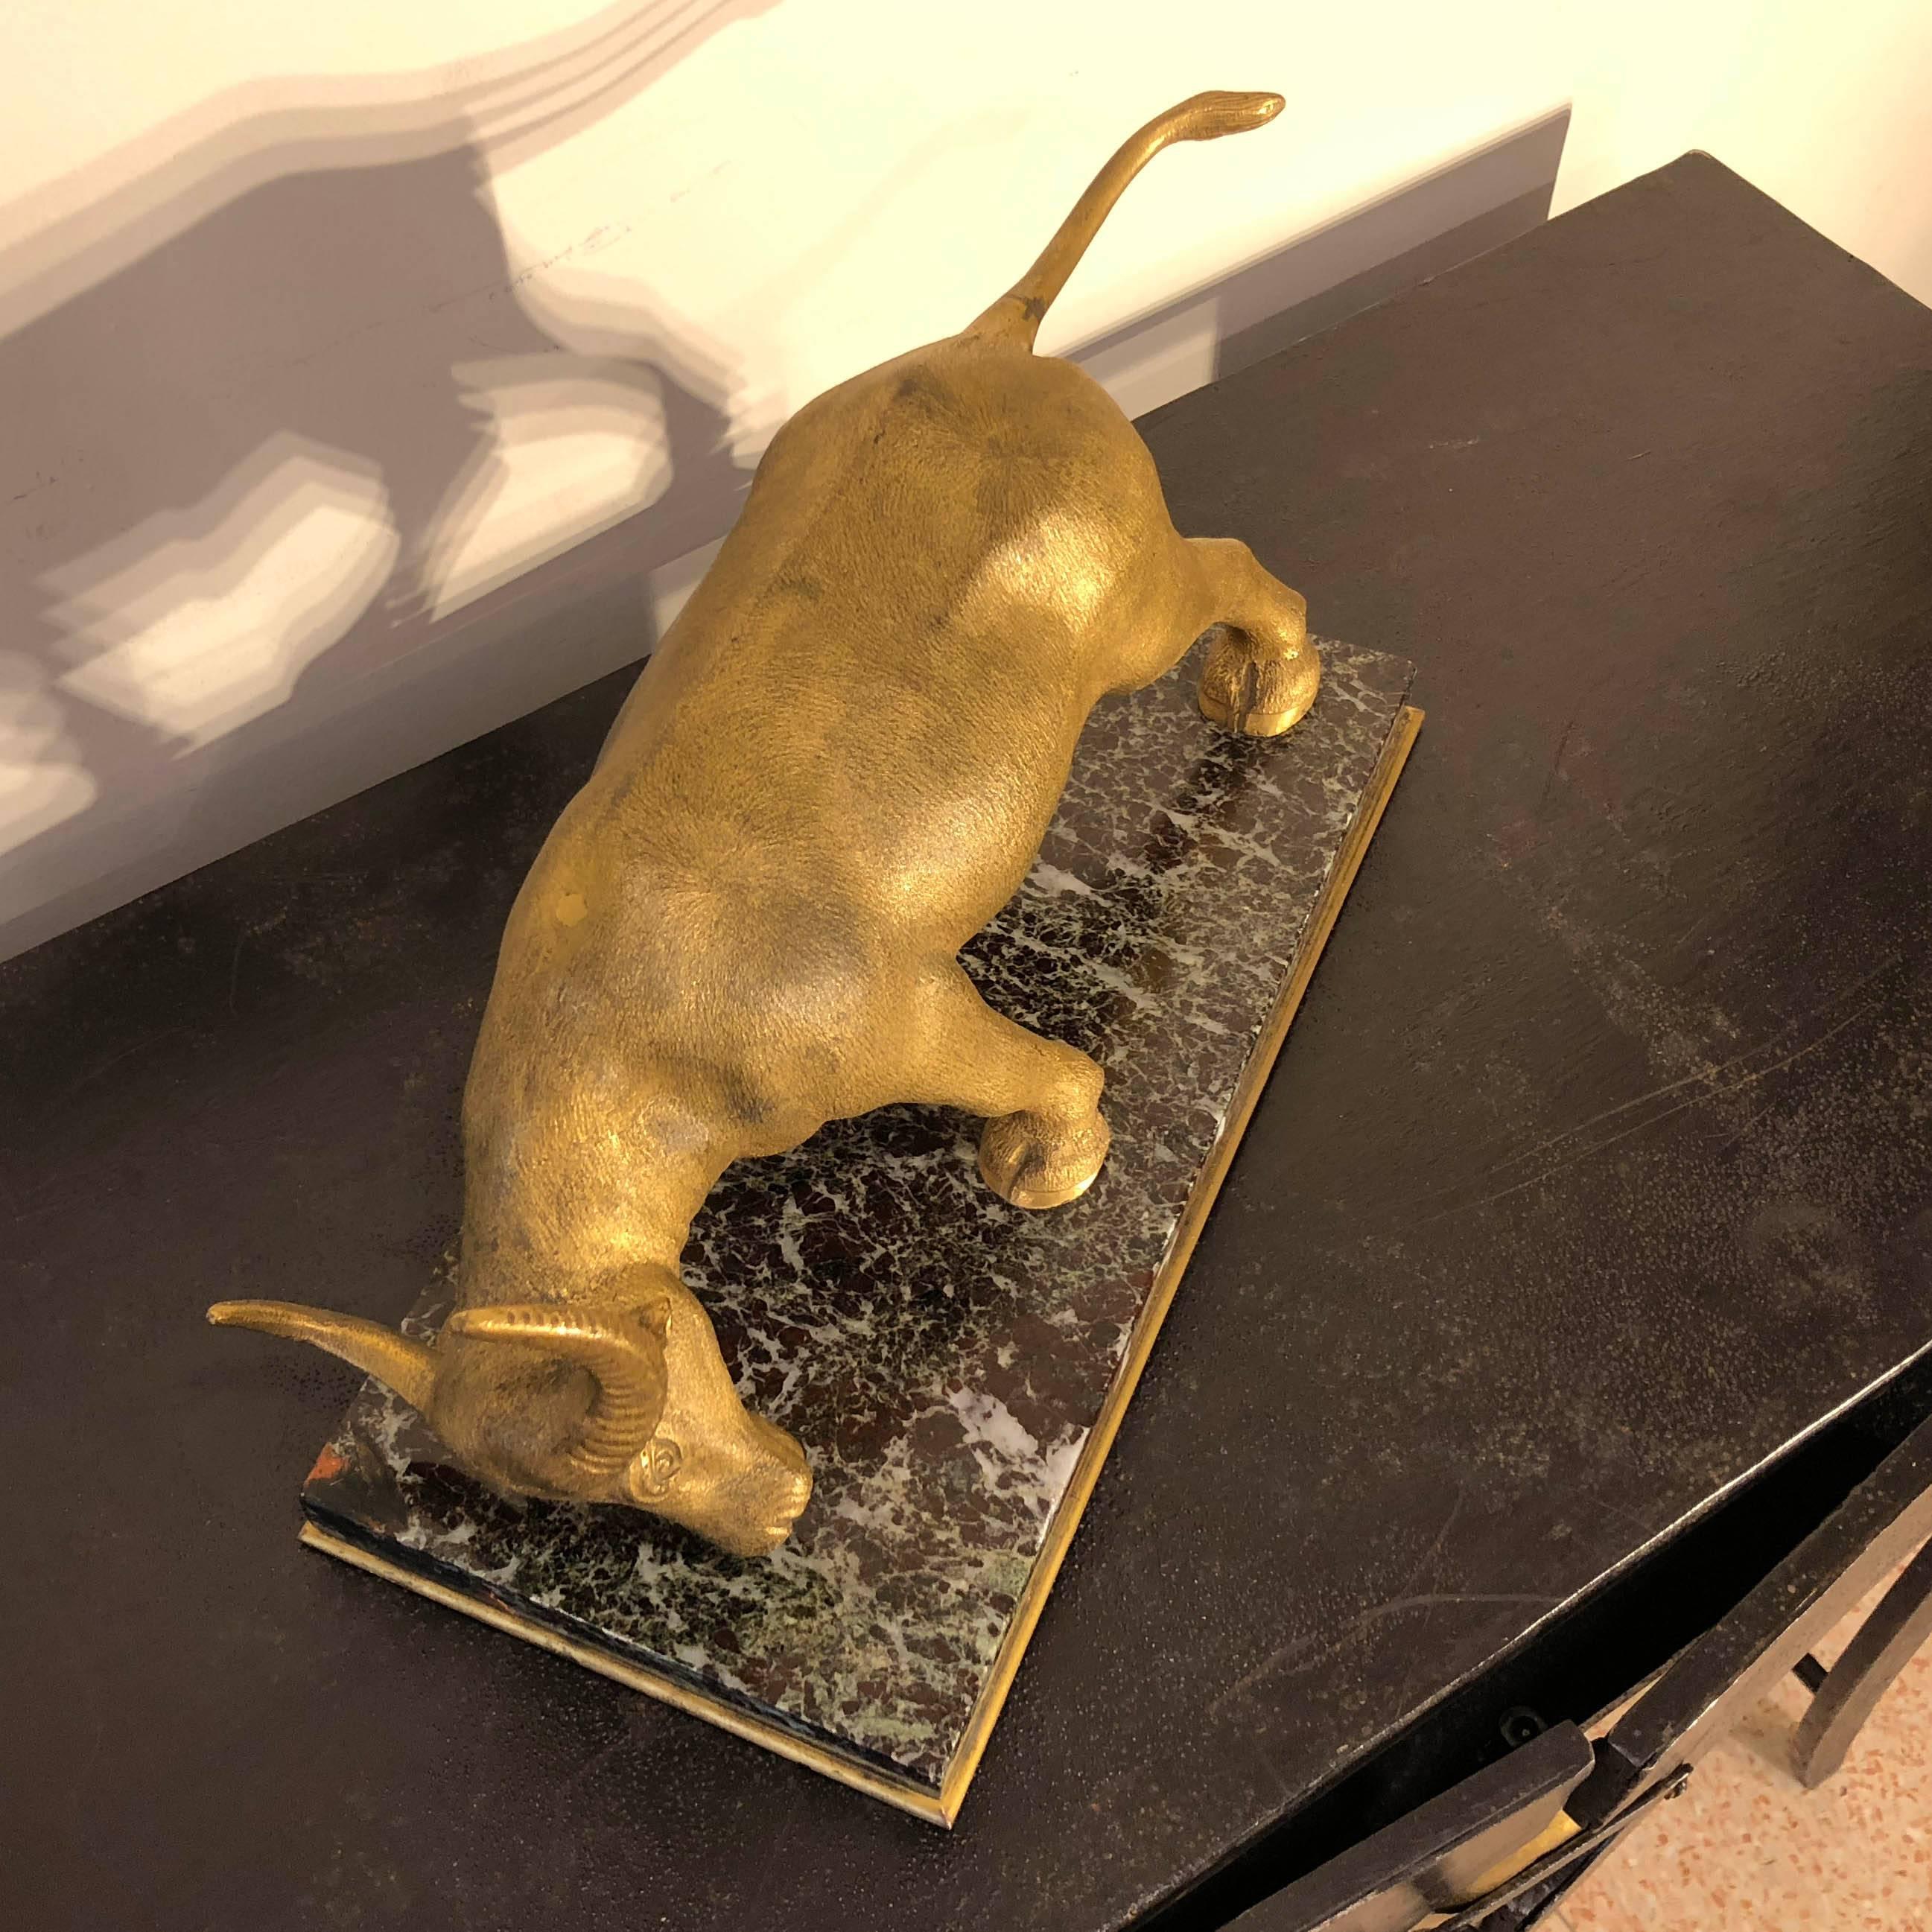 Decorative animal bronze sculpture representing a bull on a marble base golden bronze lined. Art Deco, France, early 20th century. Size: 36.5 x 17 cm, H 17 cm.
Perfect as charming Christmas gift or wedding present.














